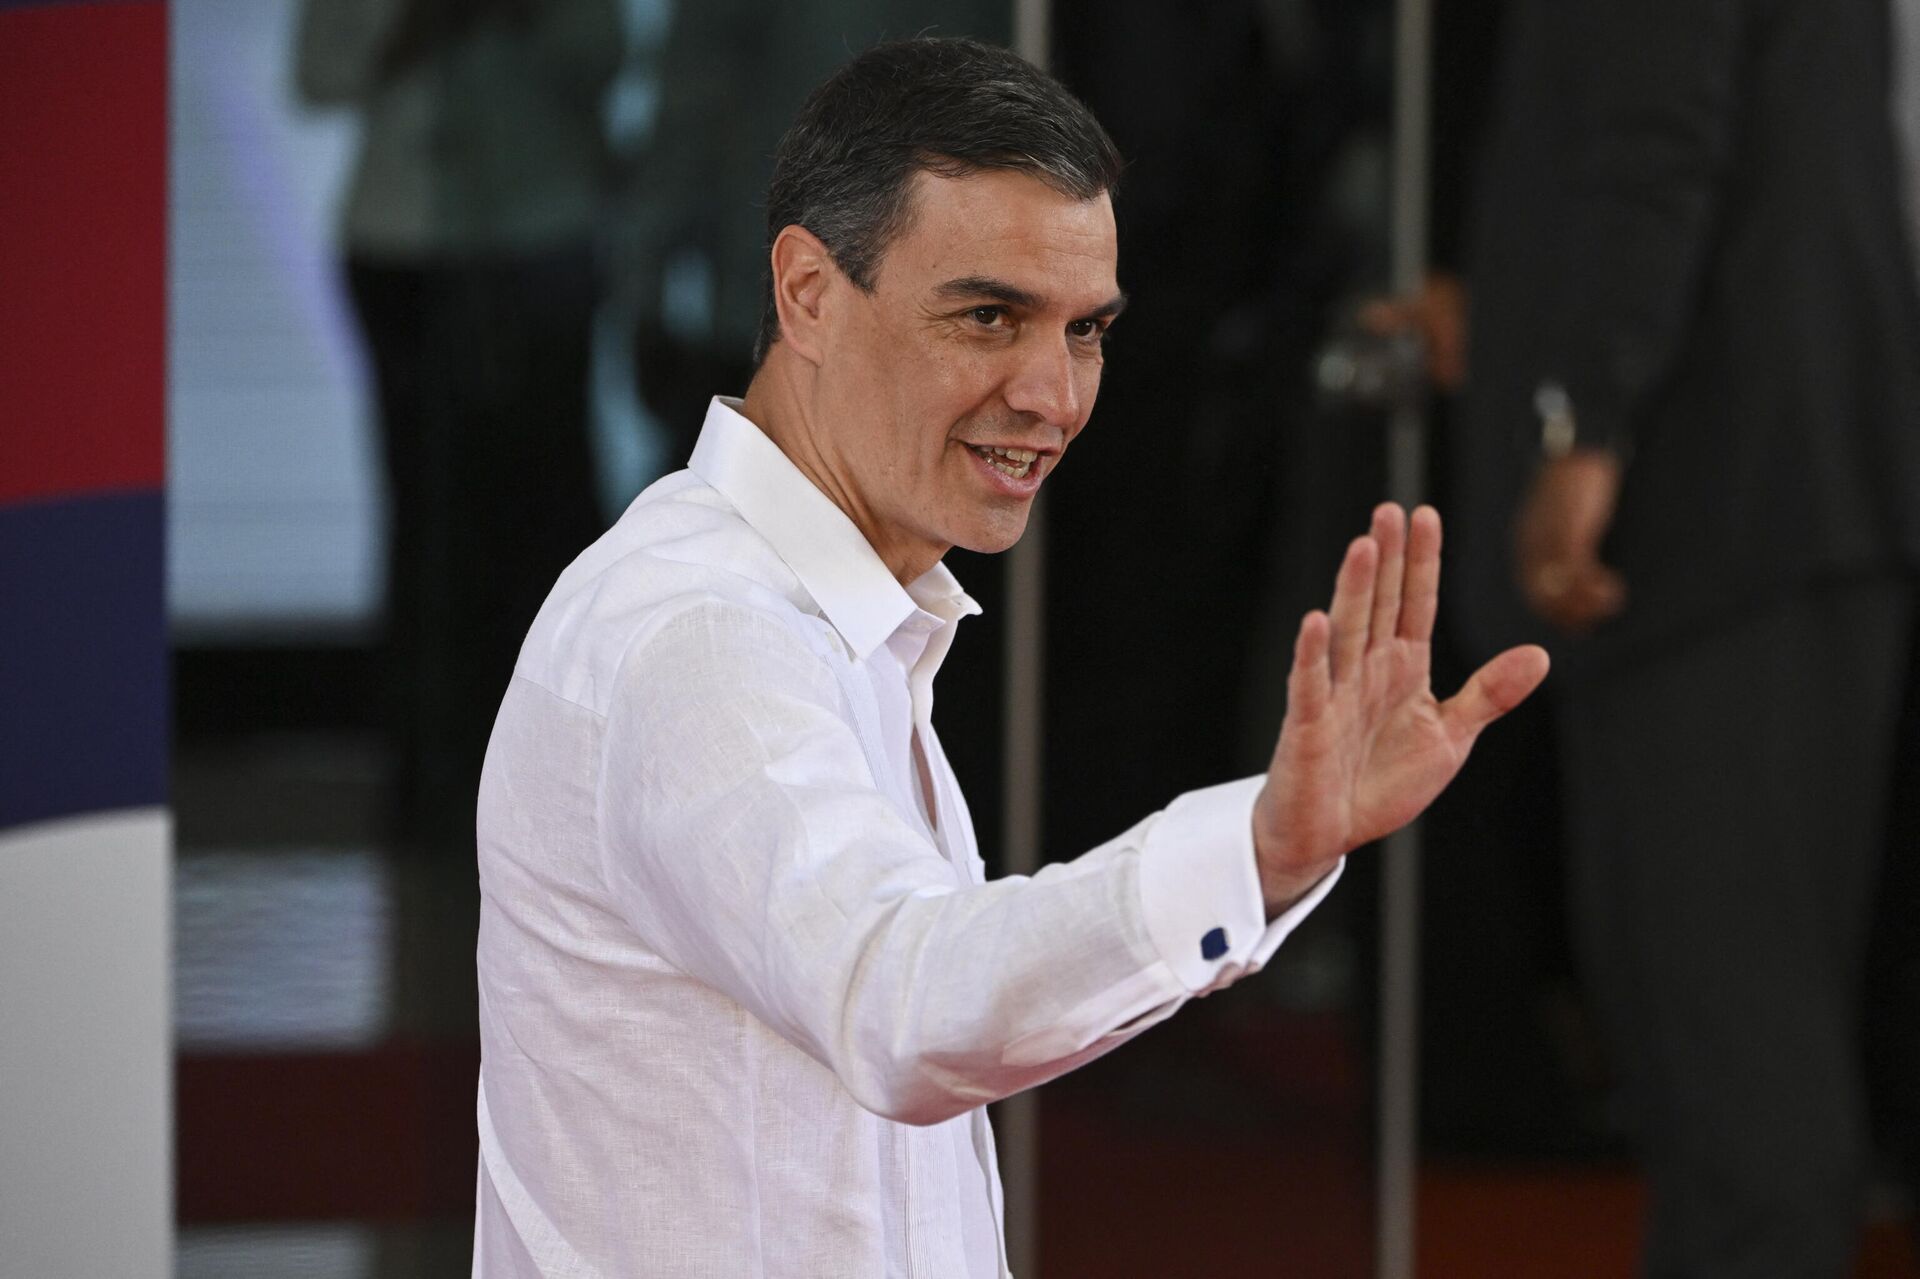 Spanish Prime Minister Pedro Sanchez waves as he arrives for the plenary session of the XXVIII Ibero-American Summit of Heads of State and Government at the Dominican Foreign Ministry building in Santo Domingo, on March 25, 2023 - Sputnik International, 1920, 30.03.2023